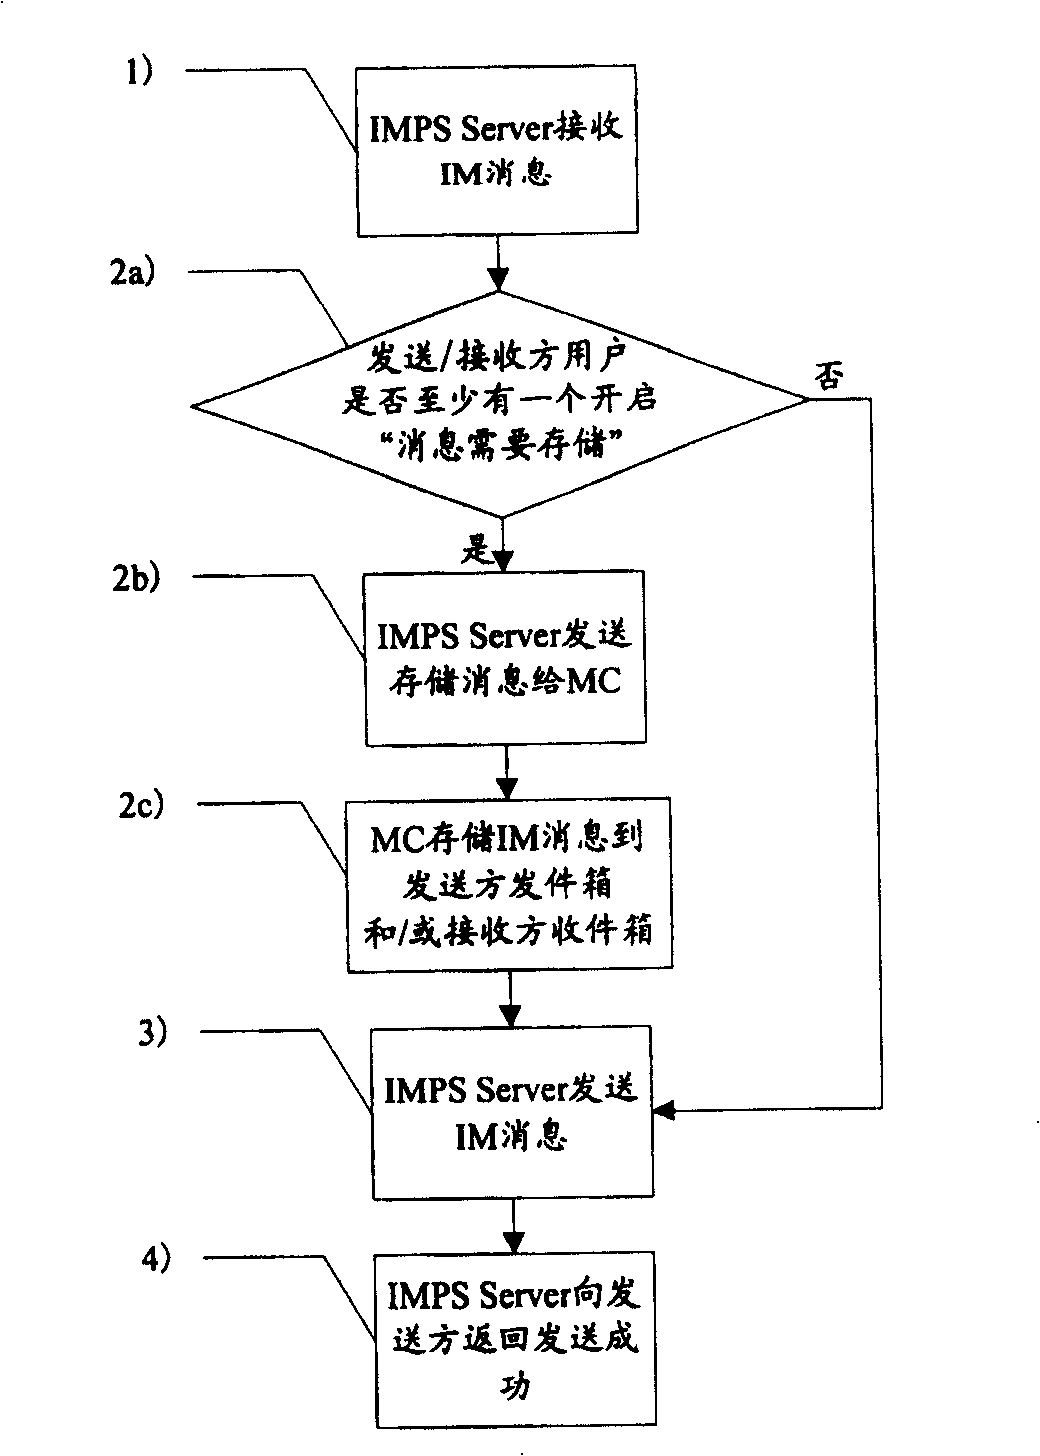 Instant message service processing method and service system